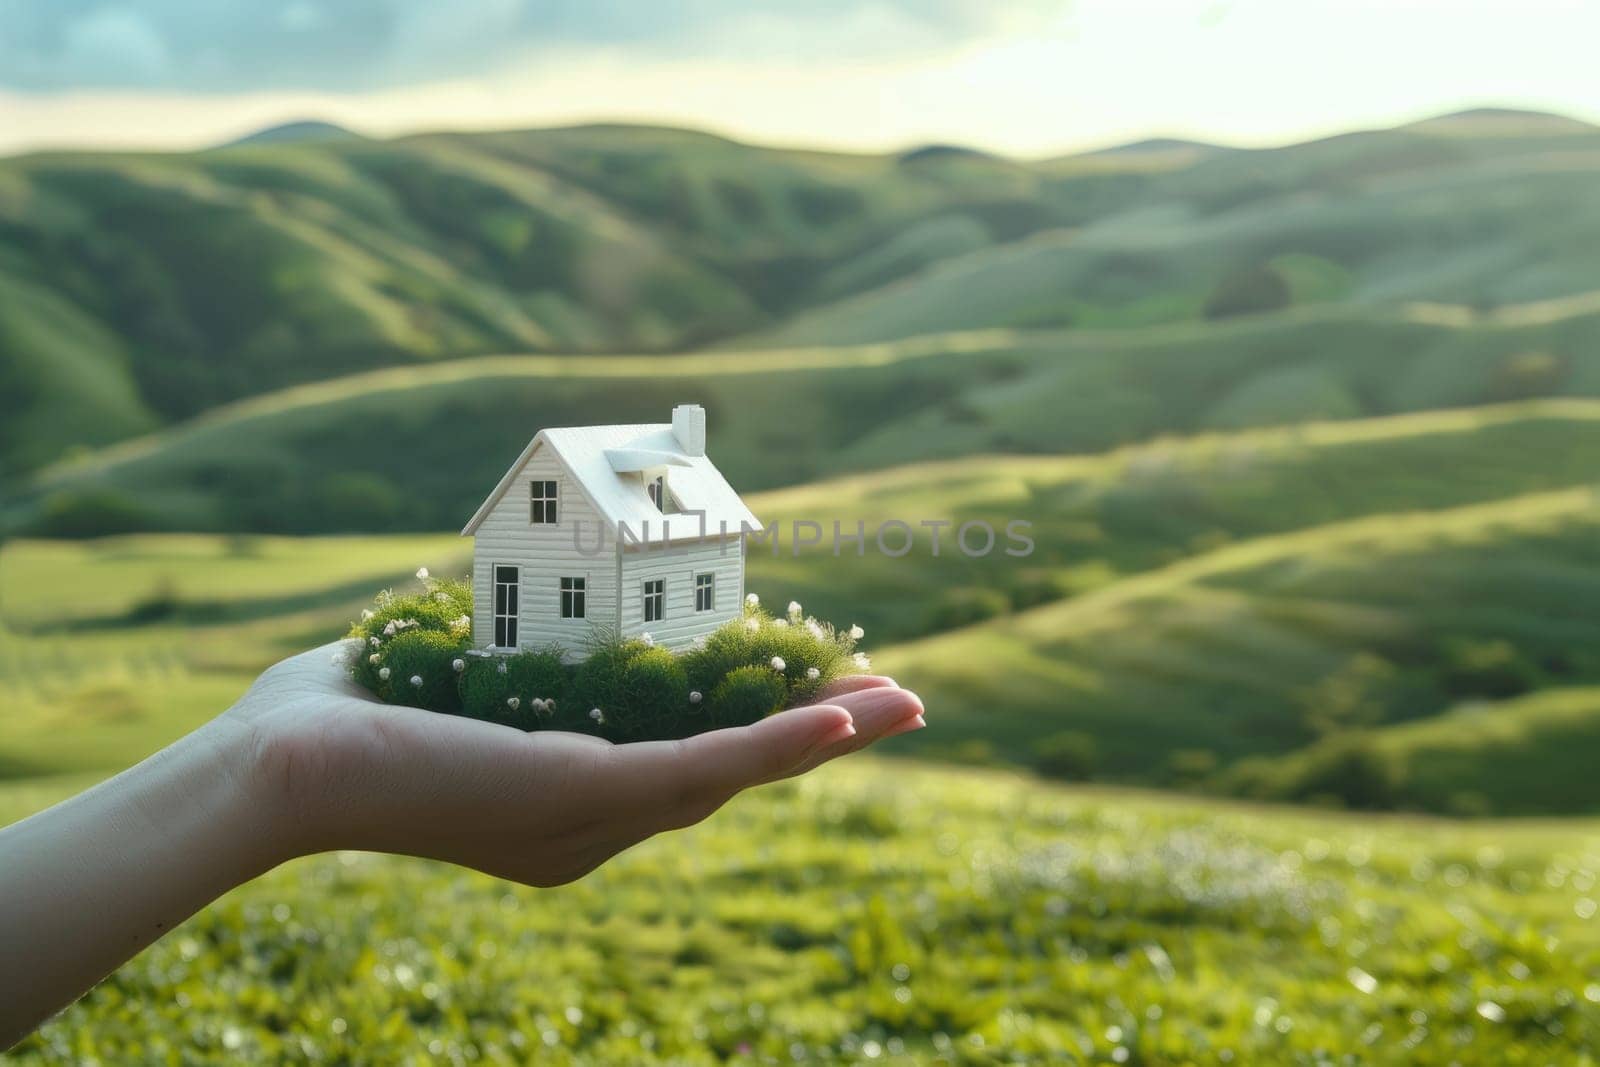 Concept of buying or building new home. Humen hand showing, offering a new dream house at the green field with copy space by golfmerrymaker